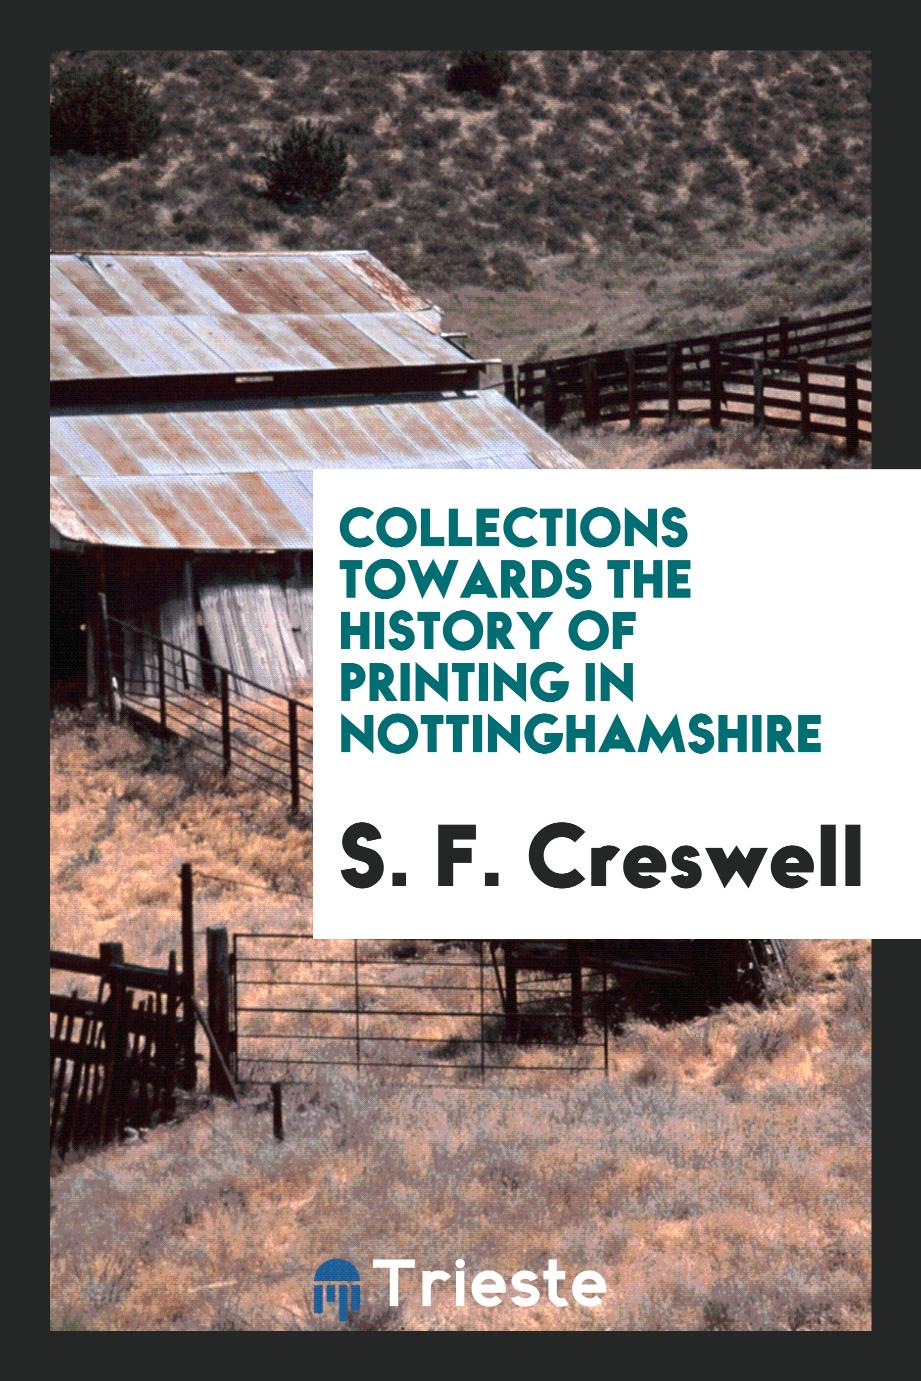 Collections towards the history of printing in Nottinghamshire